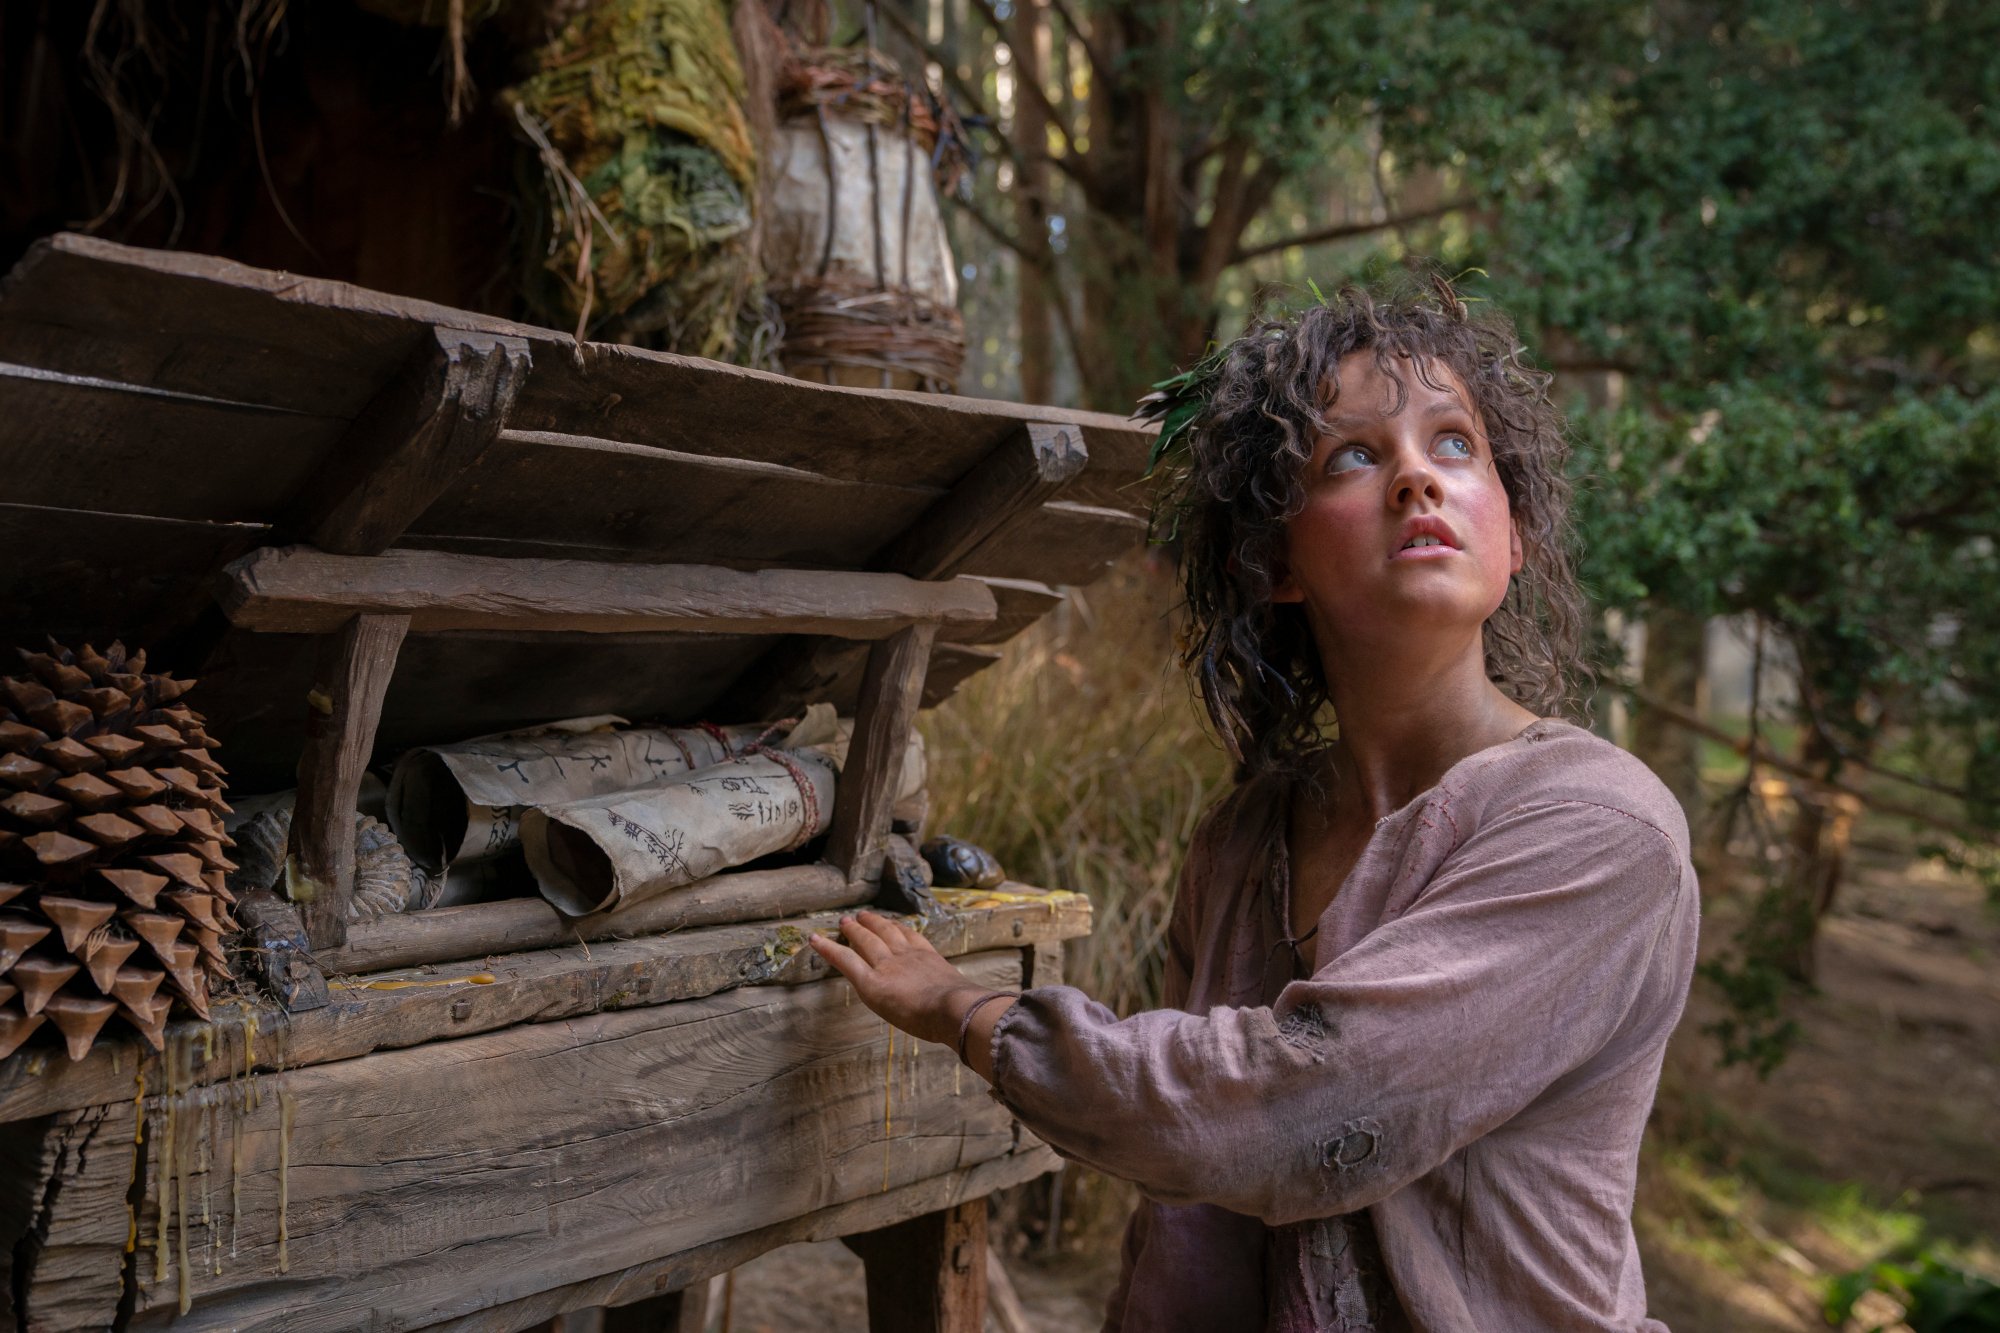 Markella Kavenagh as Nori Brandyfoot in 'The Lord of the Rings: The Rings of Power.' She's holding onto something made of wood and looking upwards